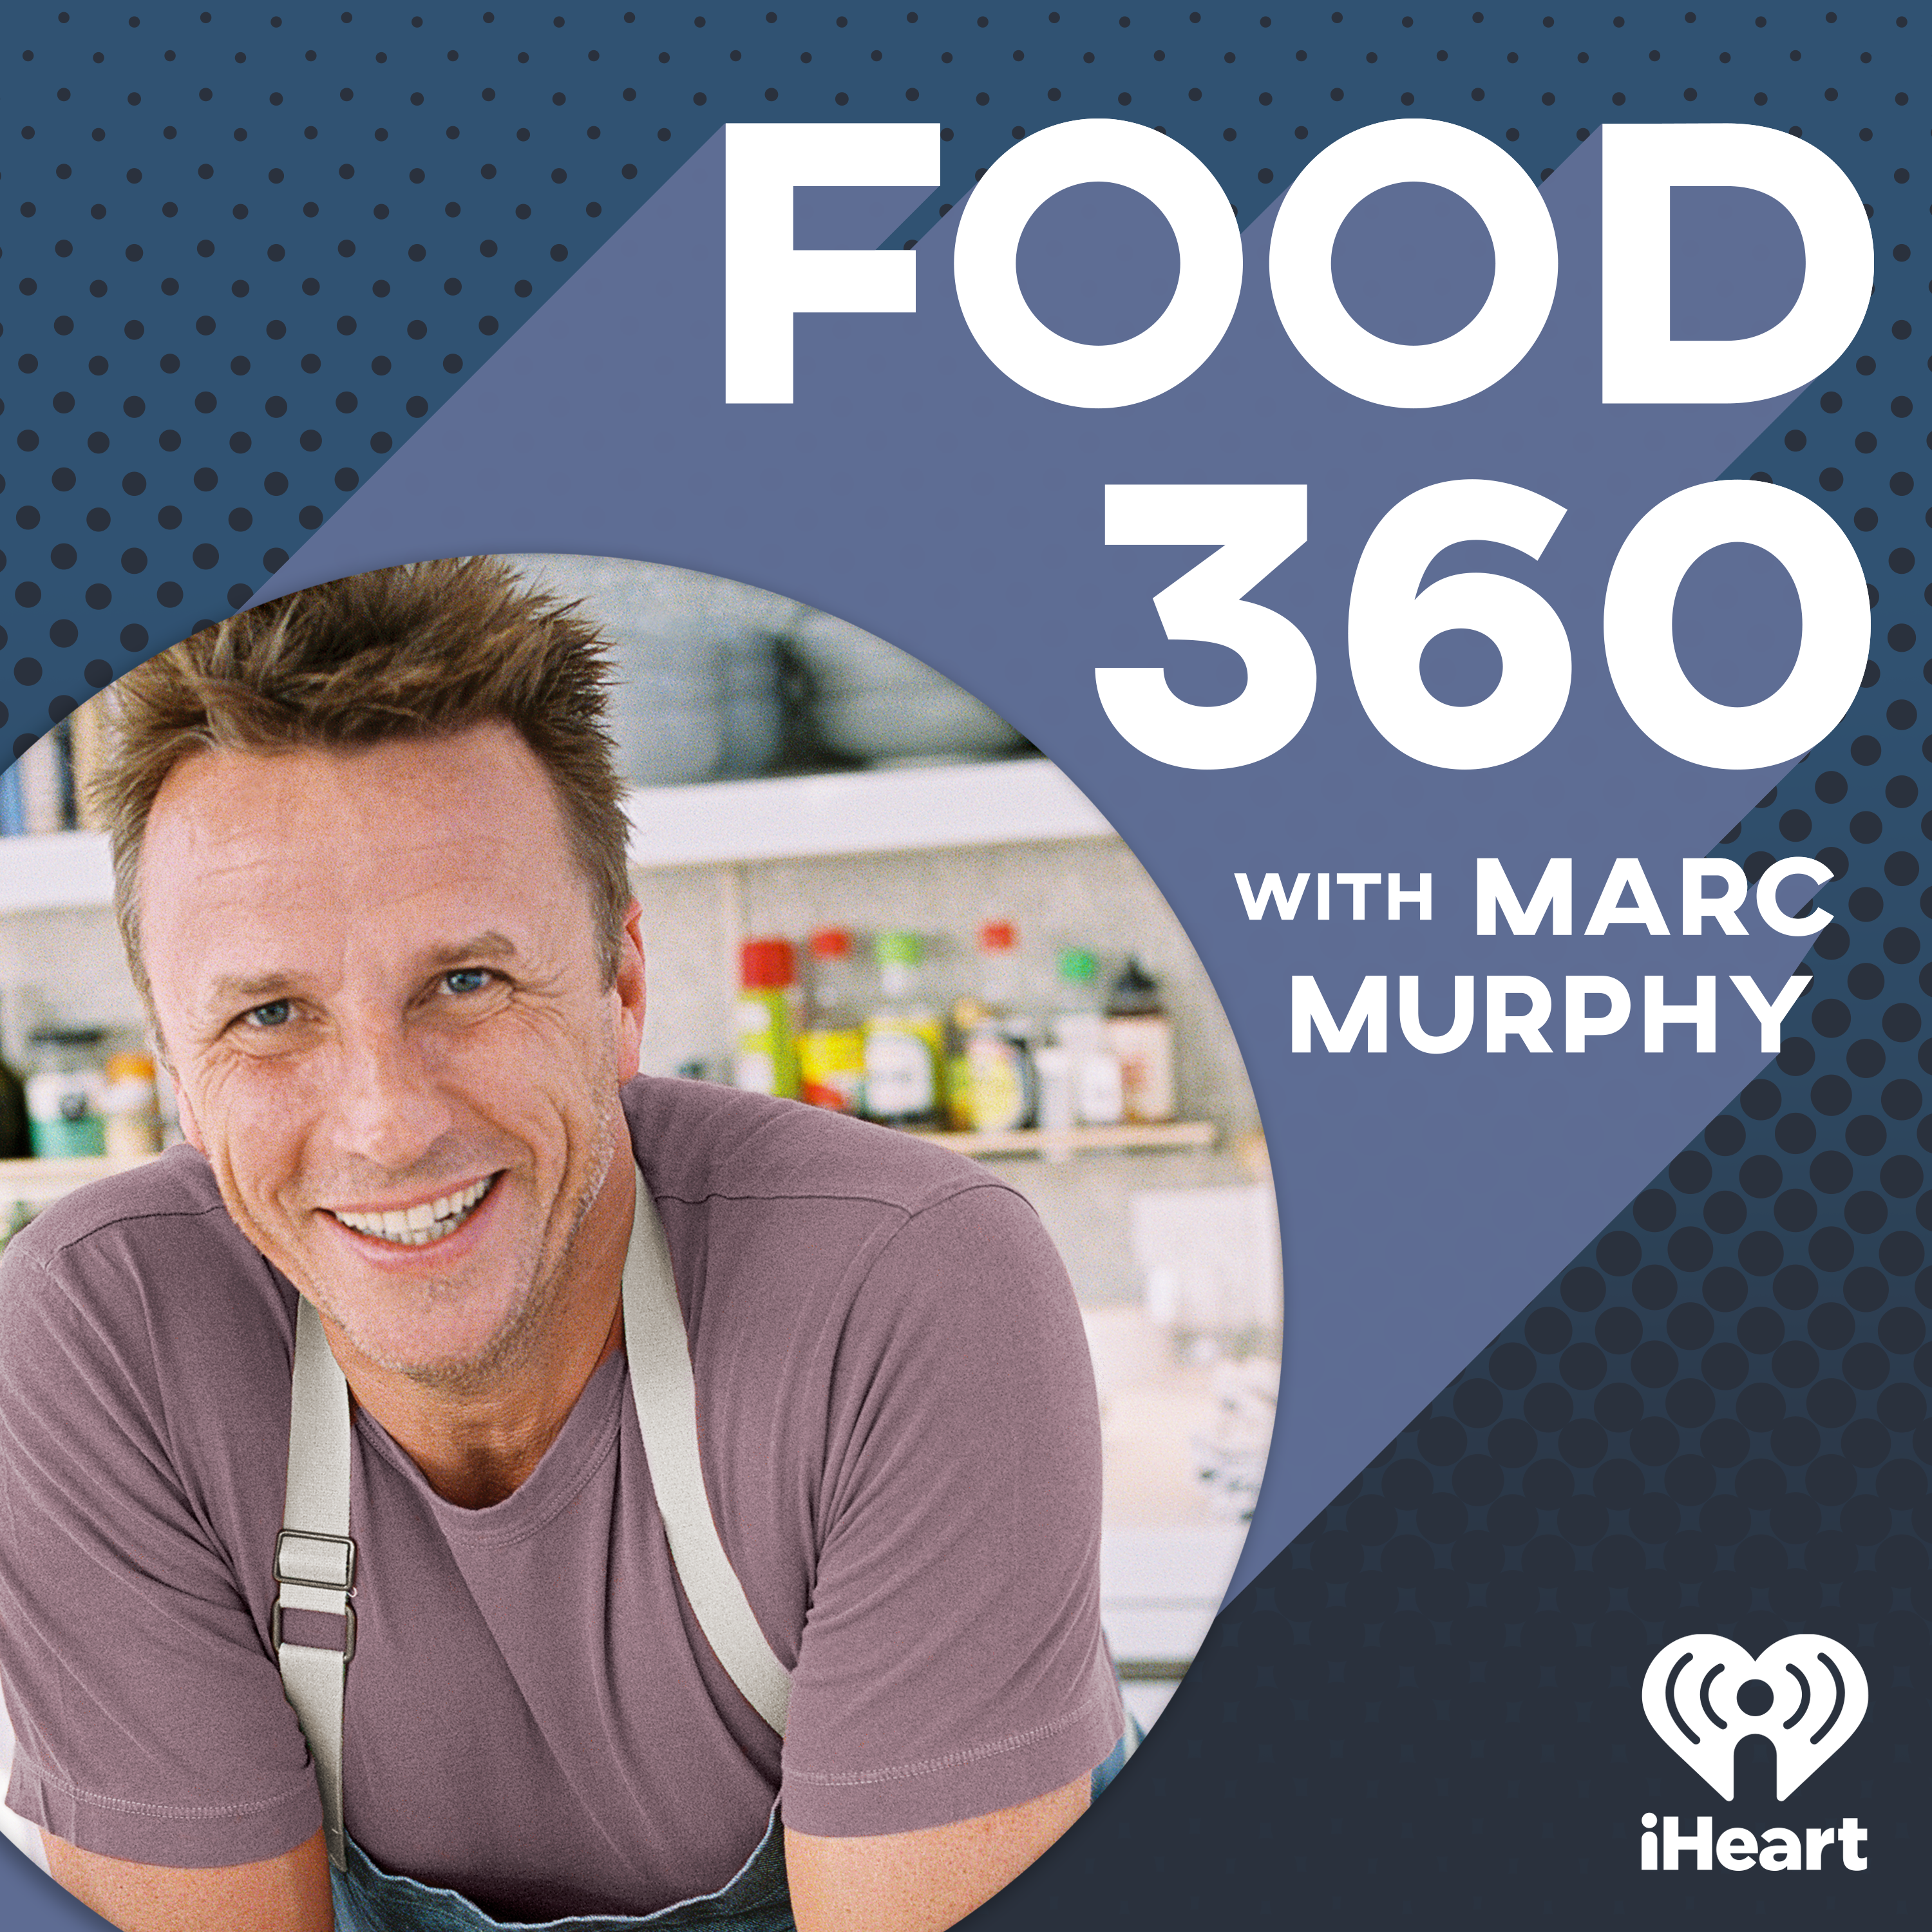 Food 360 Live with Andrew Zimmern